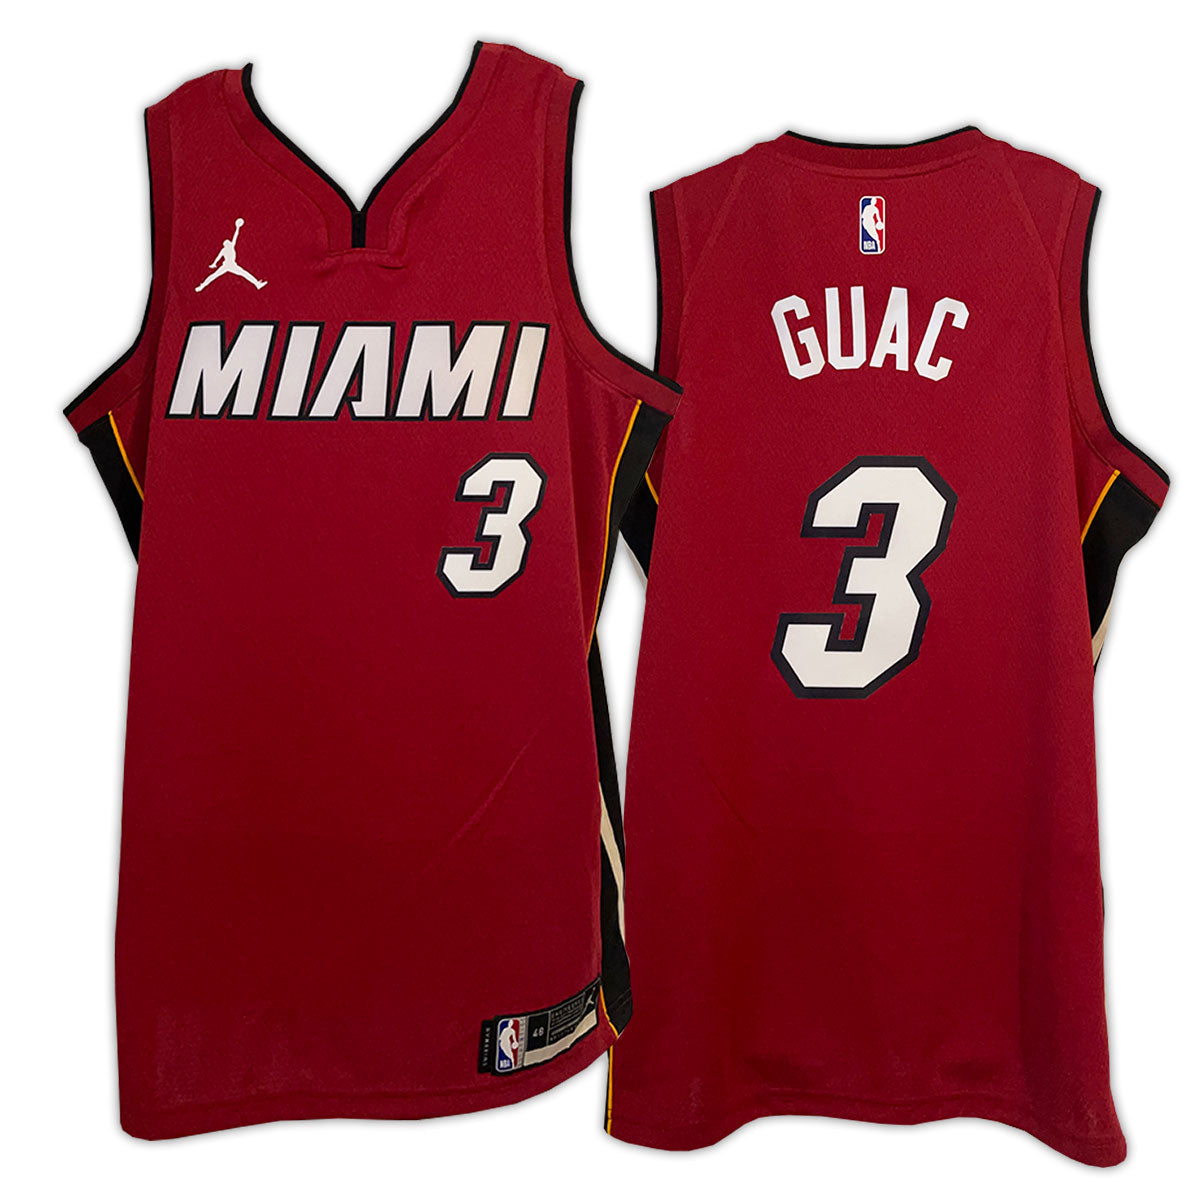 The Best Miami Heat Jerseys, From Vice Versa to Heat Strong